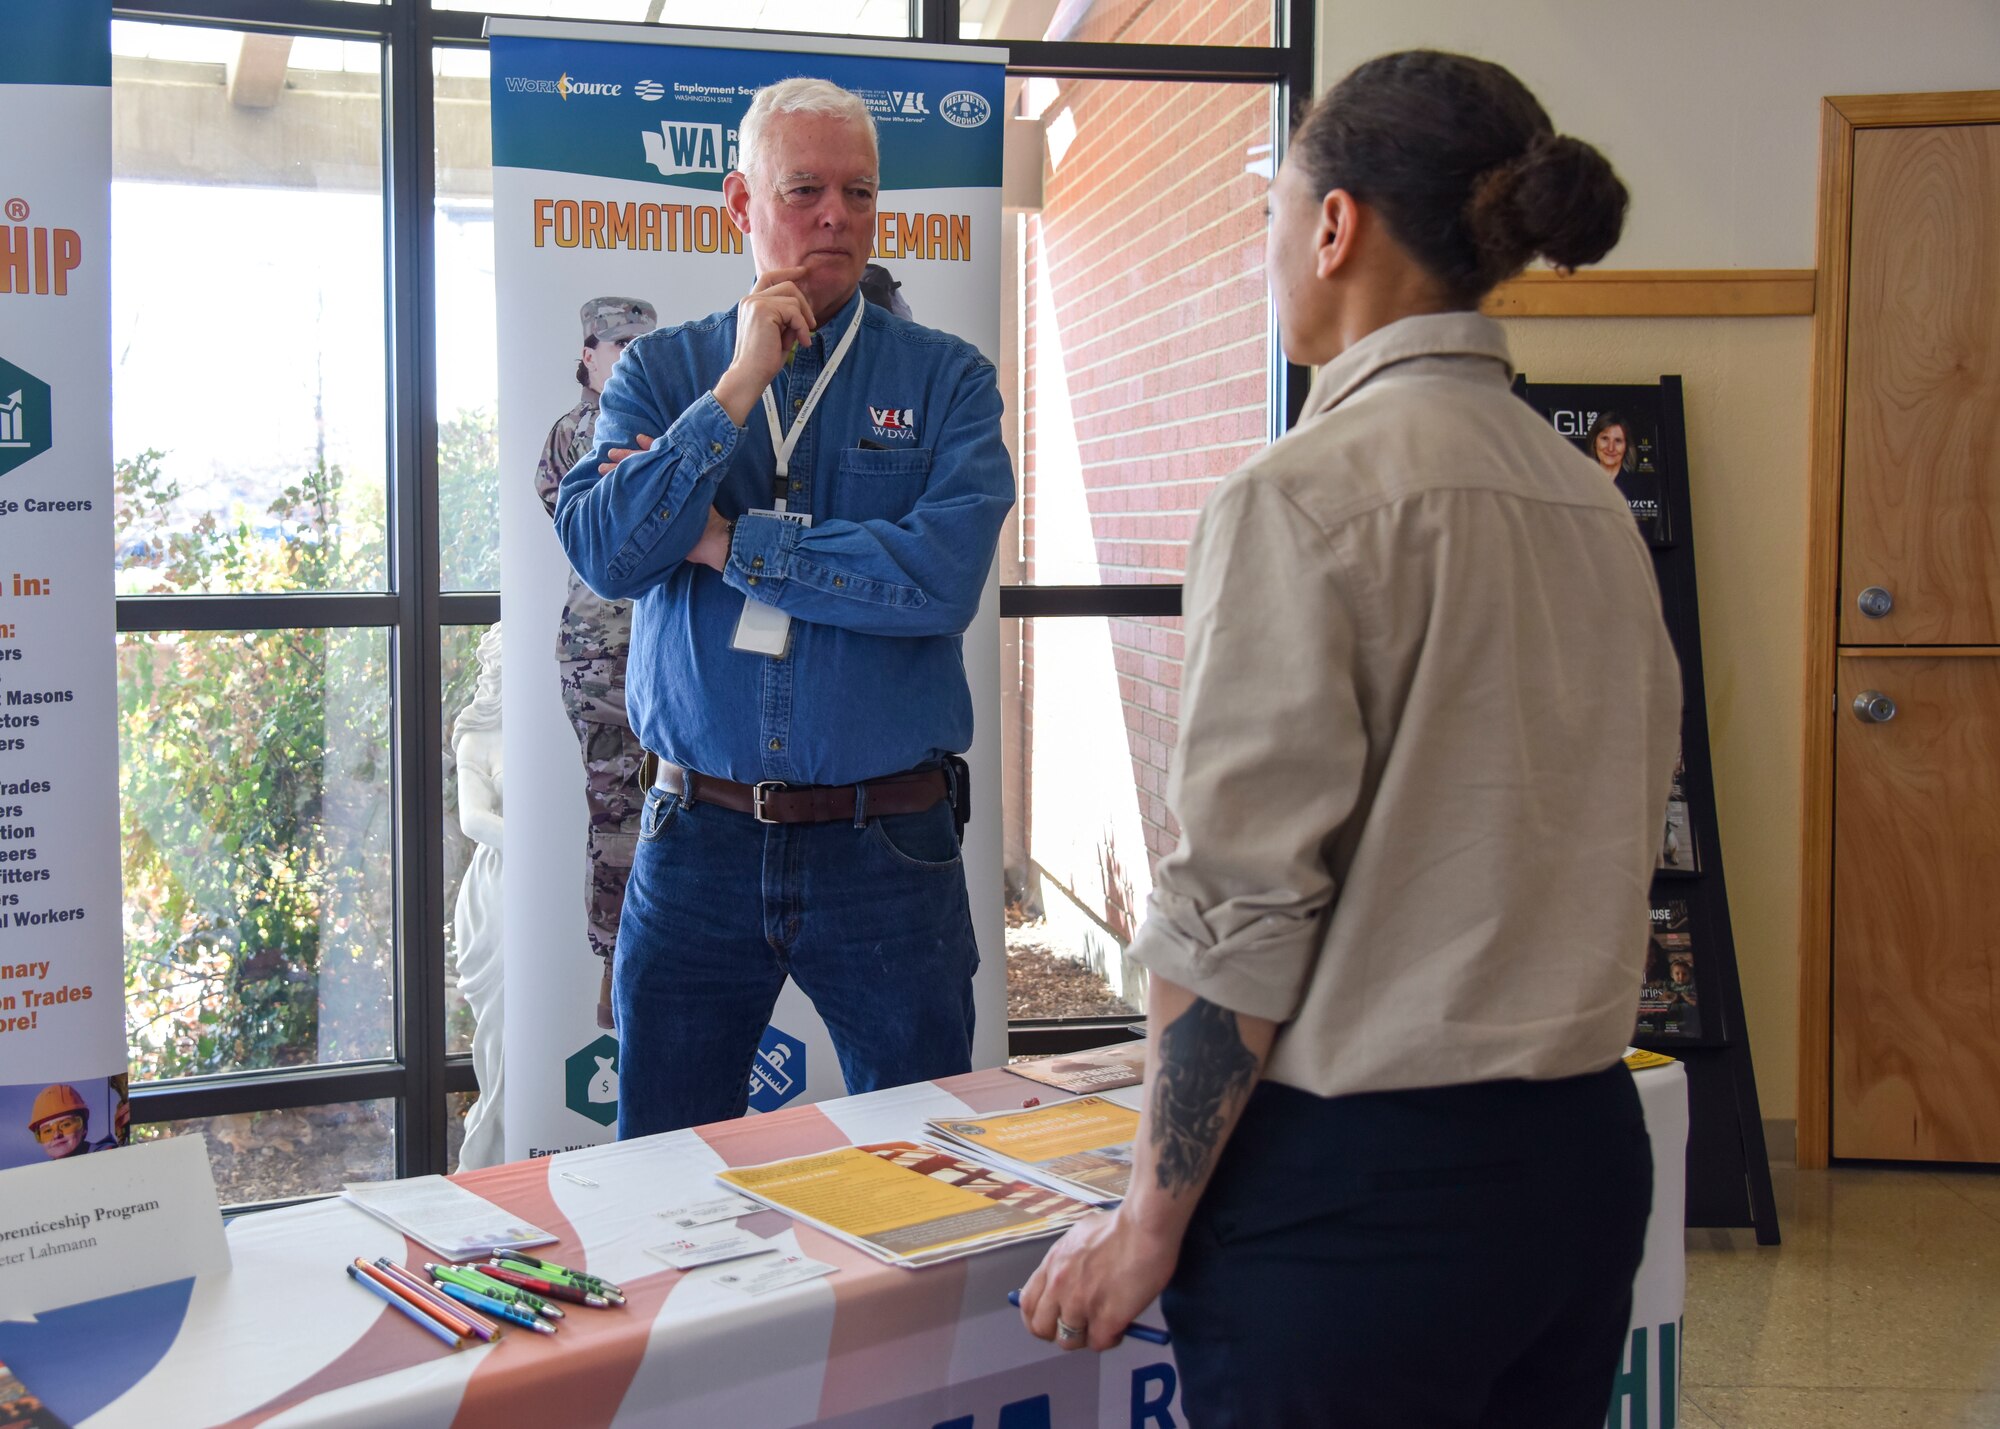 Peter Lahmann, Washington State Department of Veterans Affairs Apprenticeship program specialist, talks to a potential apprenticeship candidate at the Employment Empowerment Summit.